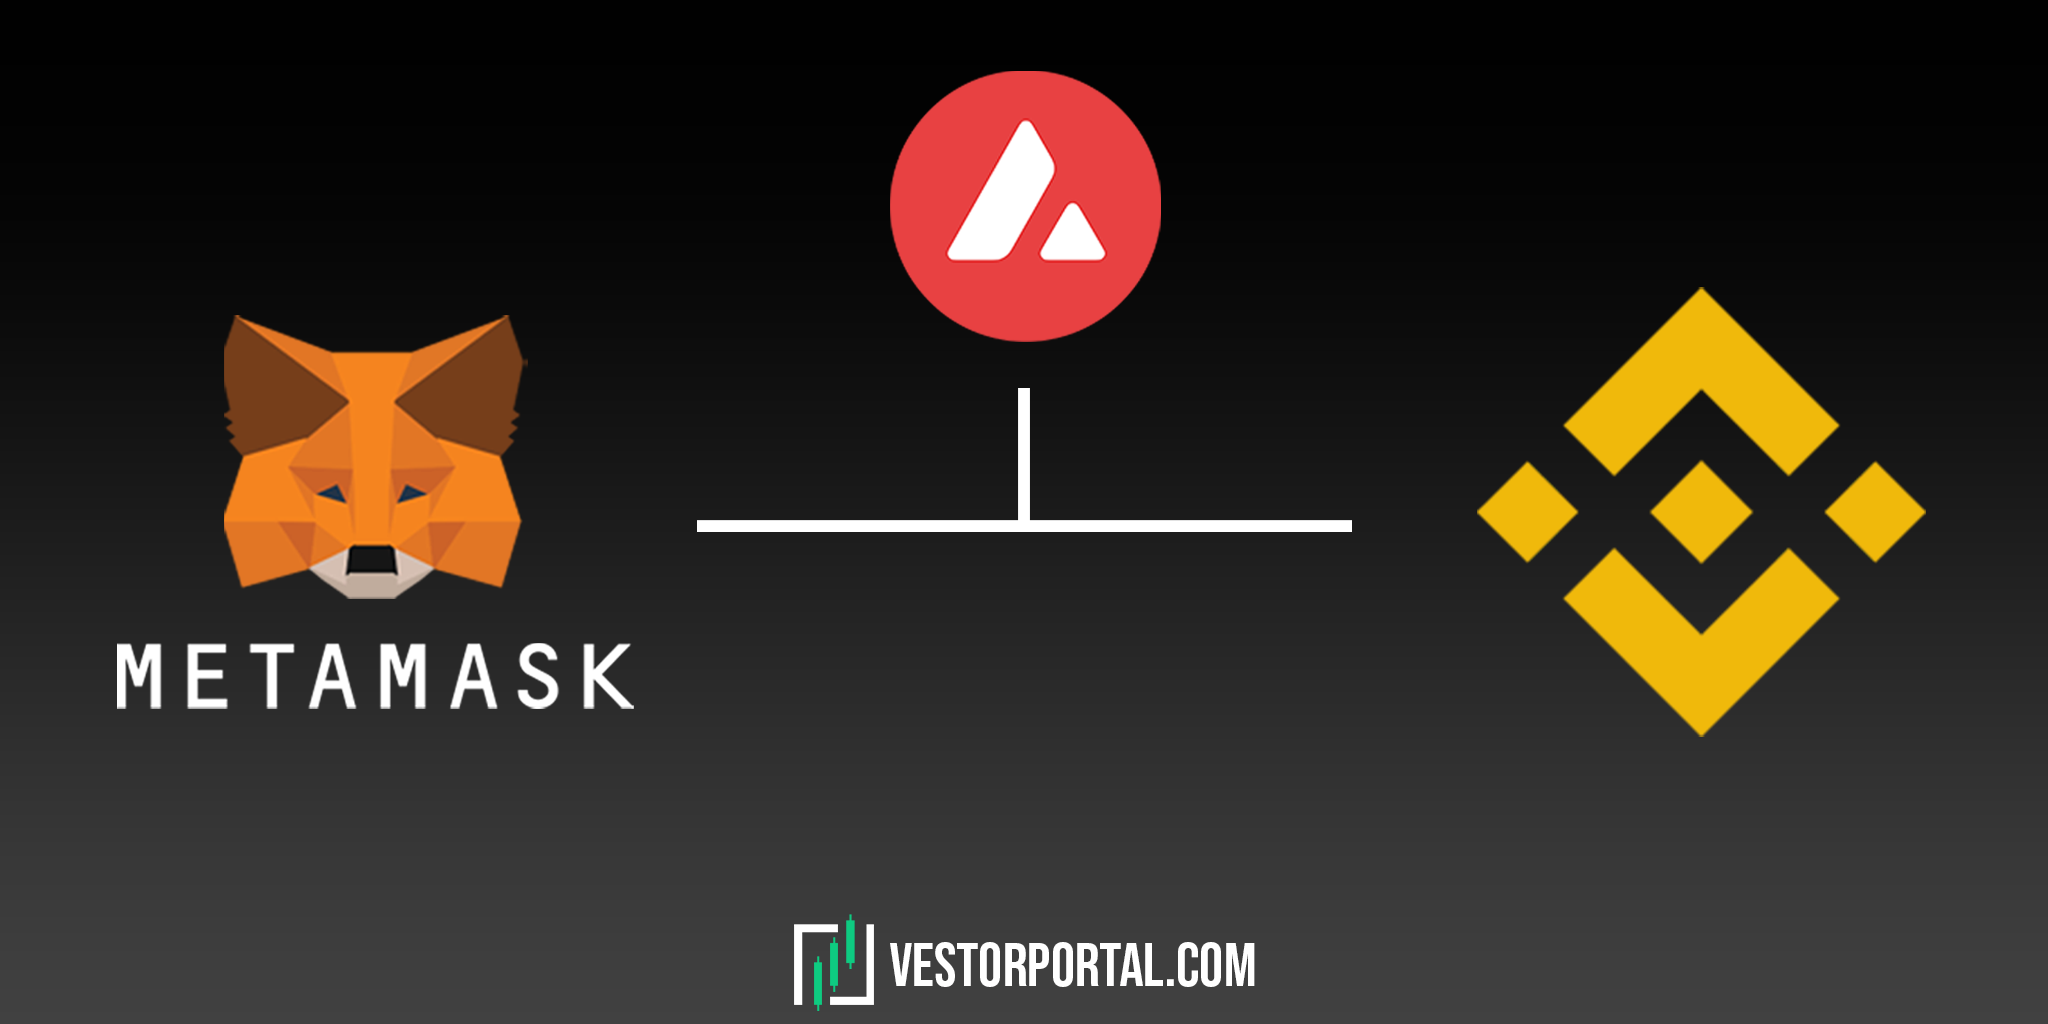 How to deposit AVAX from MetaMask to Binance?